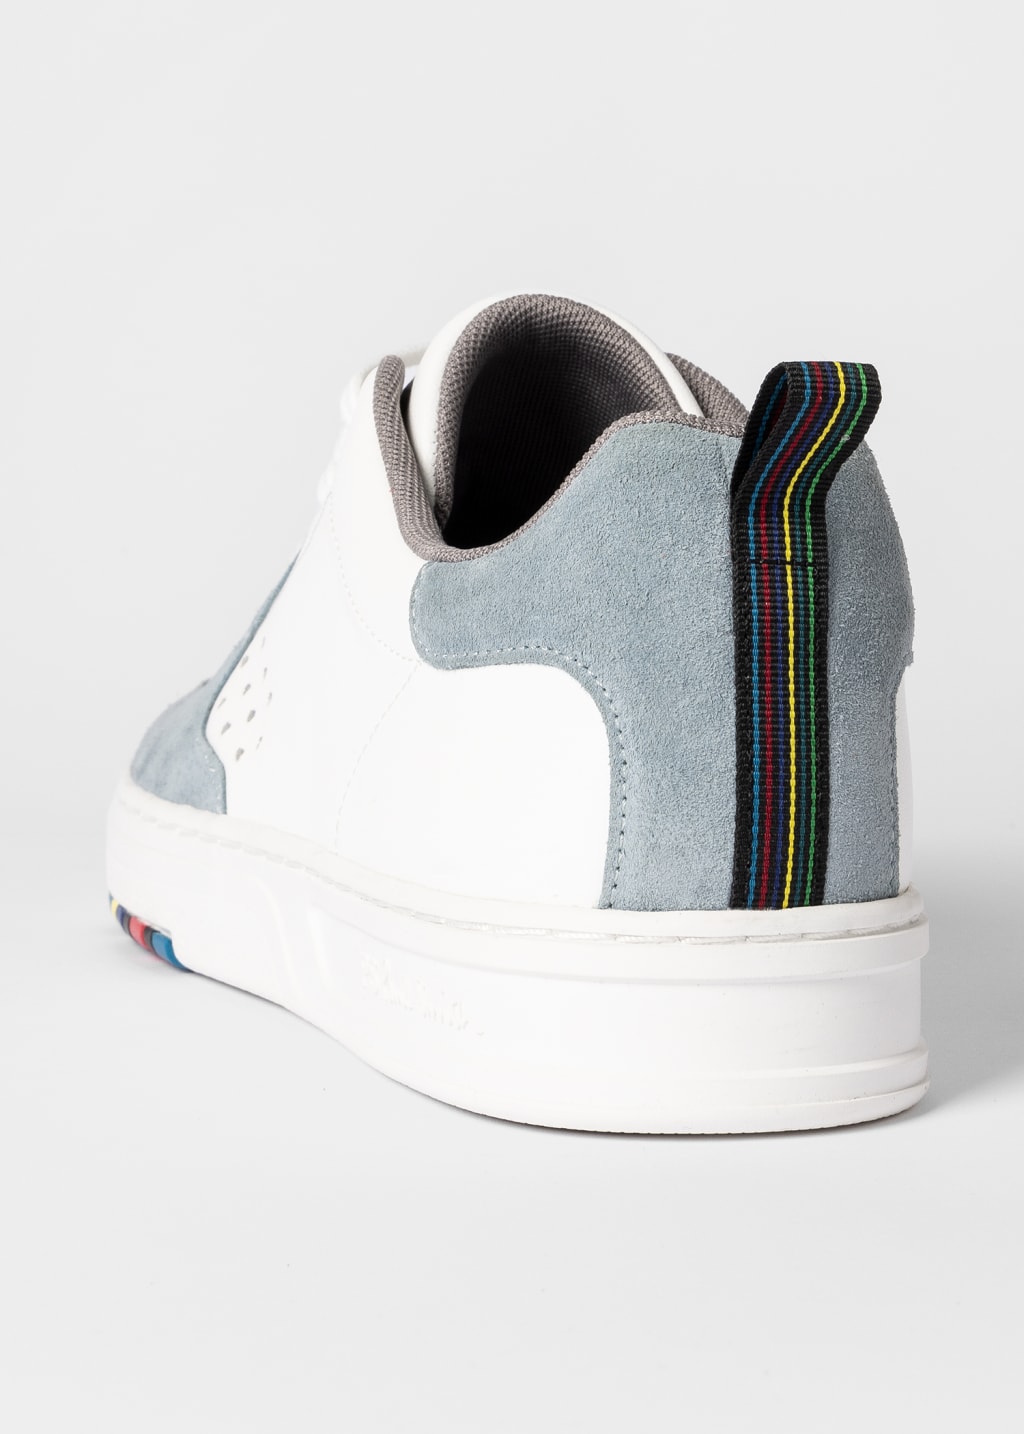 Detail View - White and Light Blue 'Cosmo' Trainers Paul Smith